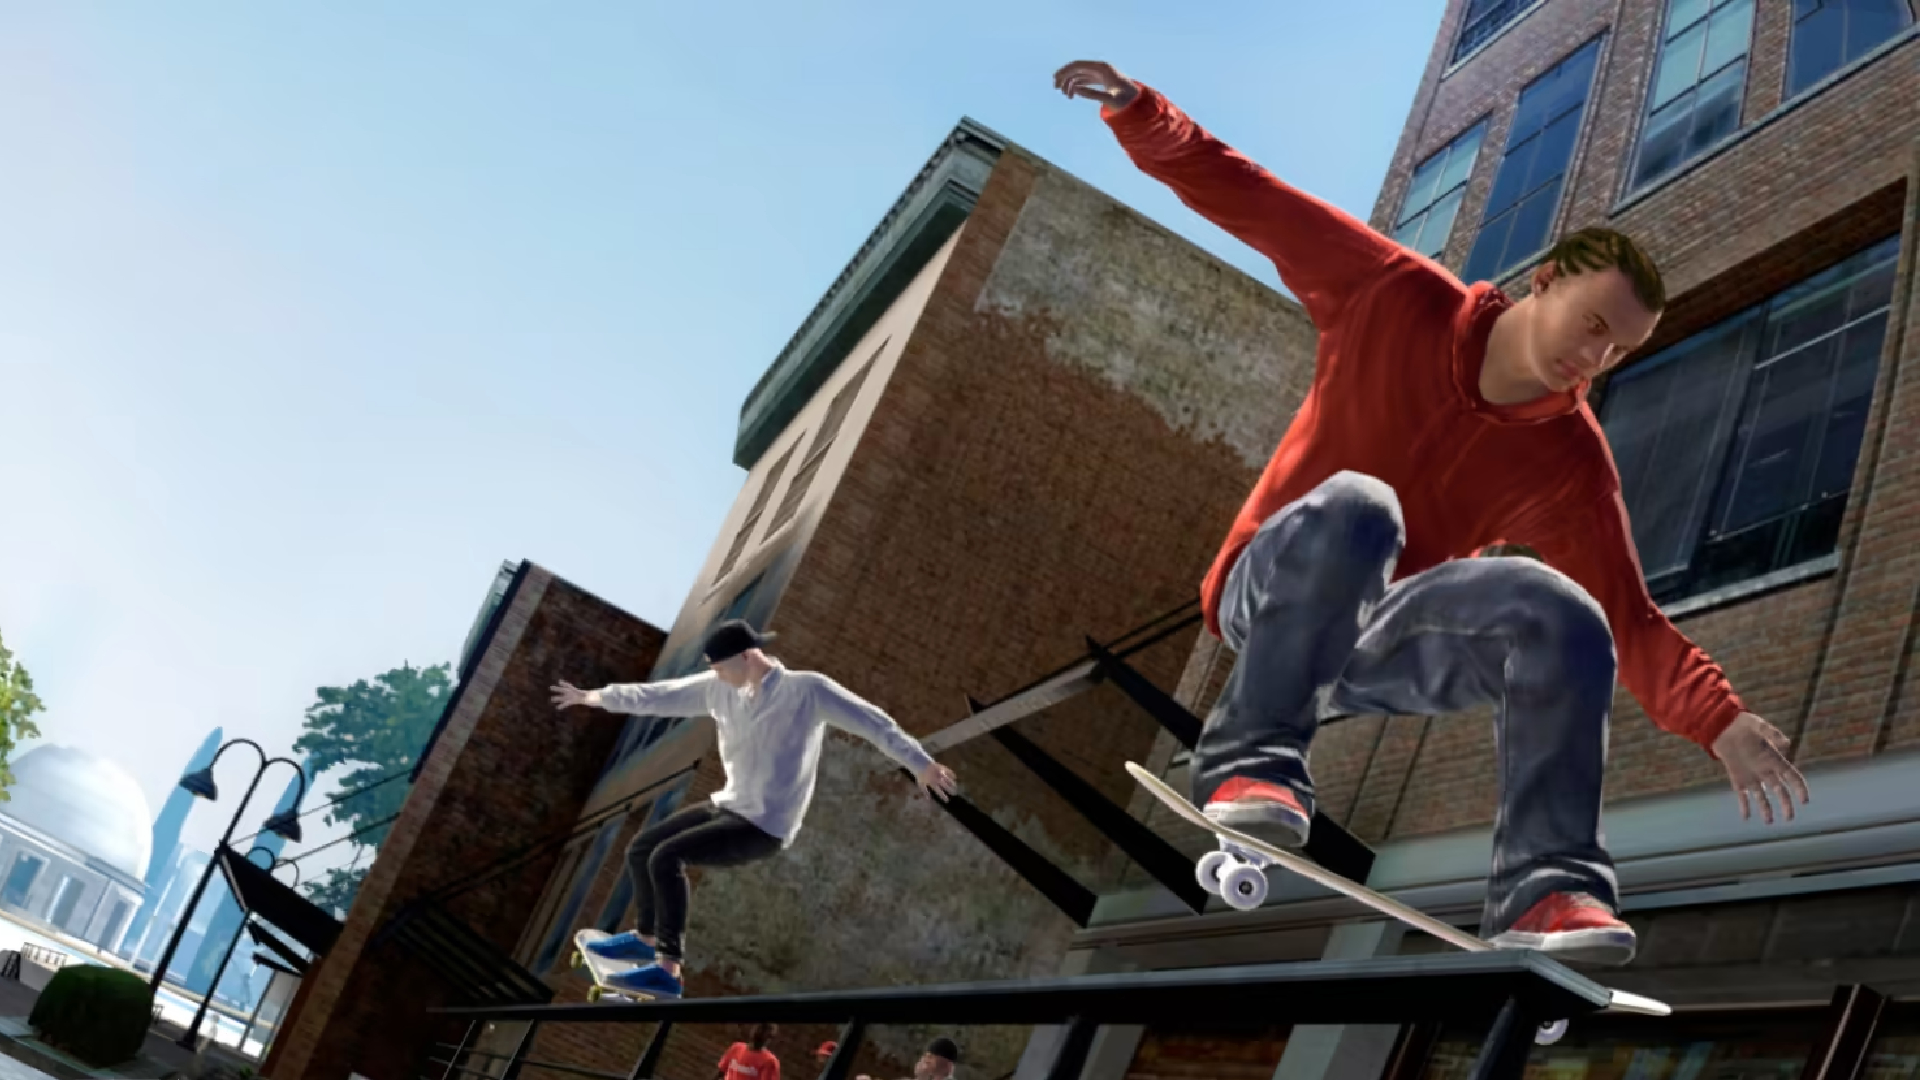 RealOpinions: Skate 4 is Coming!: EA Play, Release Date, The Future of Skate  and More!